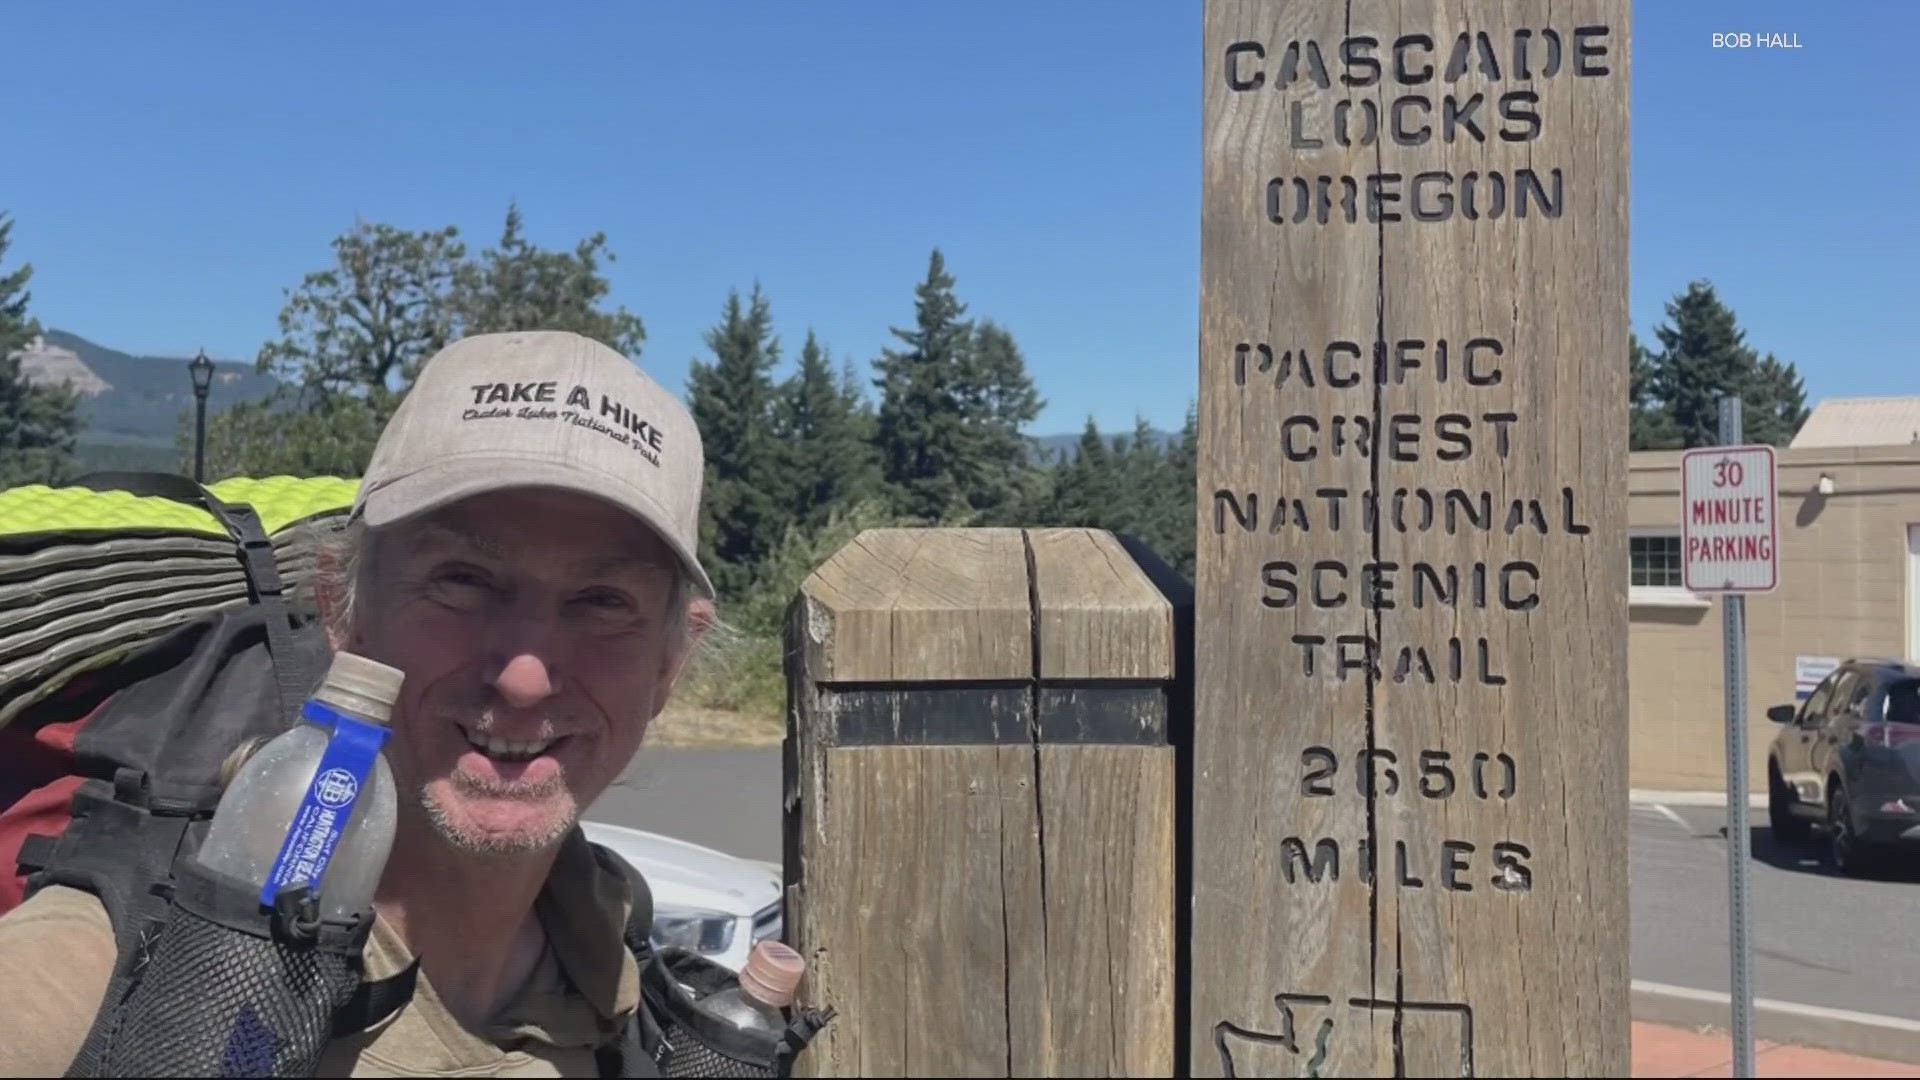 Bob, 67, of Vancouver began a 2,600-mile hike of the Pacific Crest Trail on April 6. This weekend he'll be continuing north for the final 520 miles.